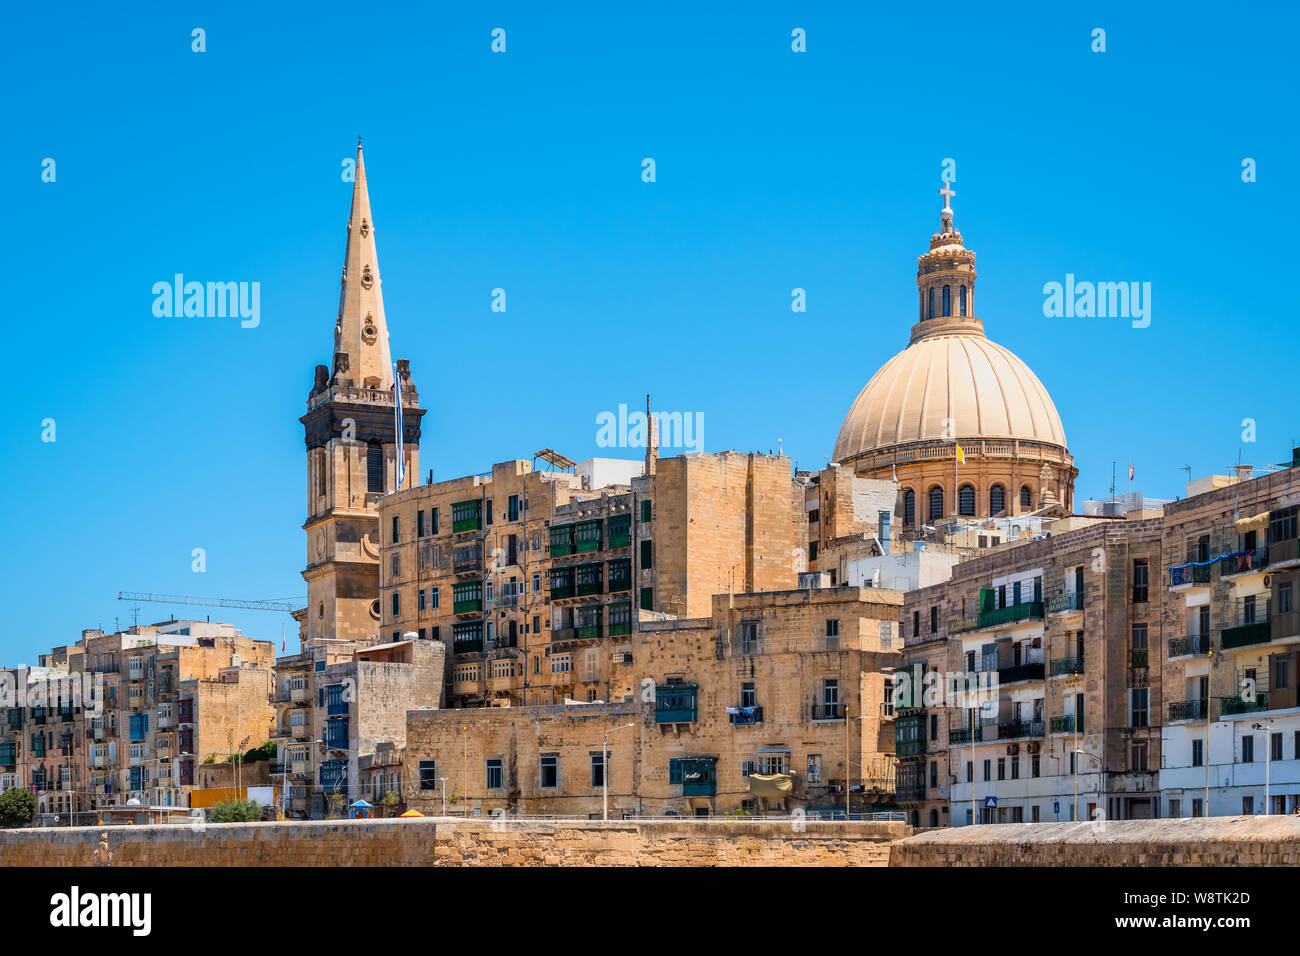 View of cathedral and belltower in old city centre of Valletta, Malta. Stock Photo